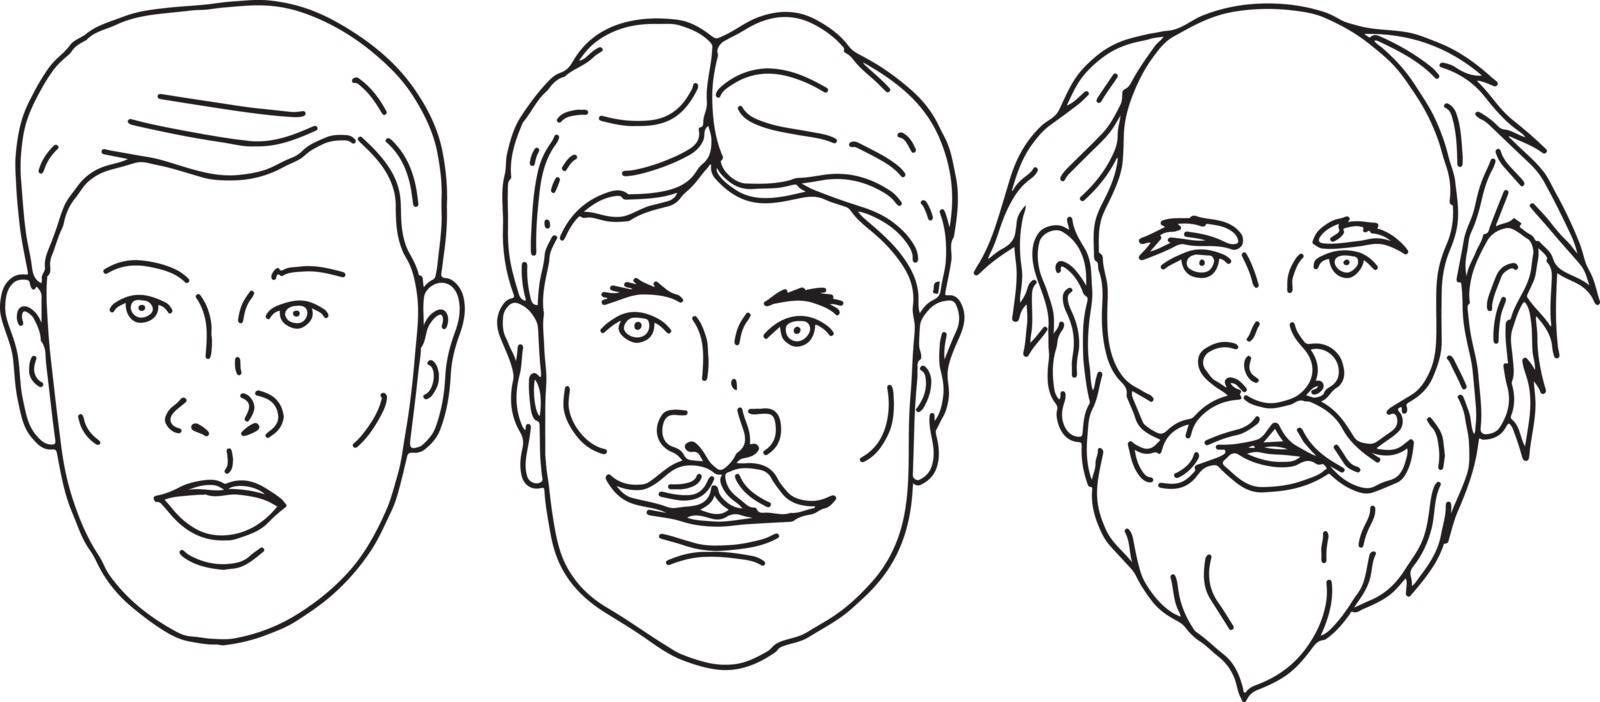 Drawing sketch style illustration of  head of a Caucasian male morphing from young to adult middle age to old senior on isolated white background.